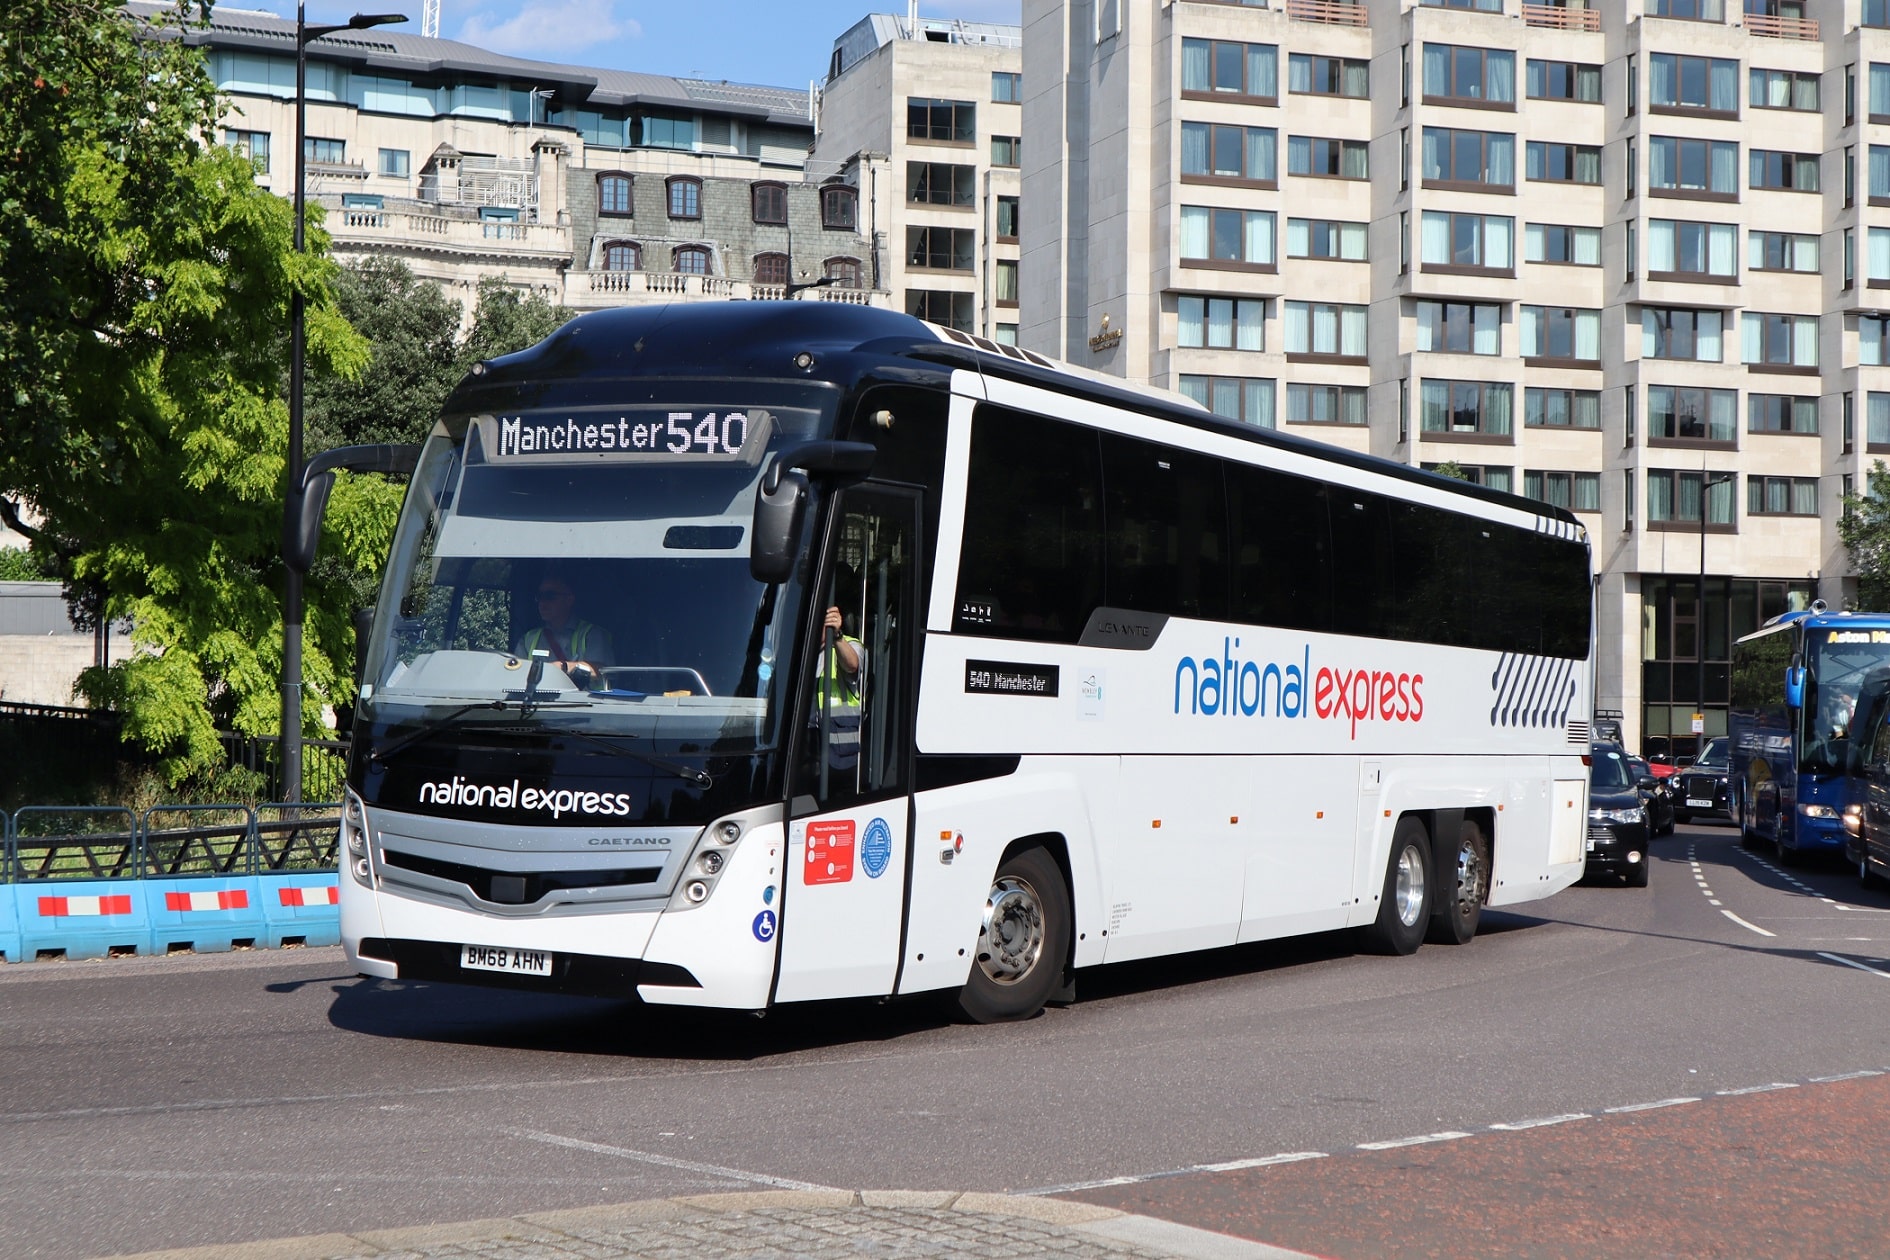 National Express UK Coach seeing business come back strongly